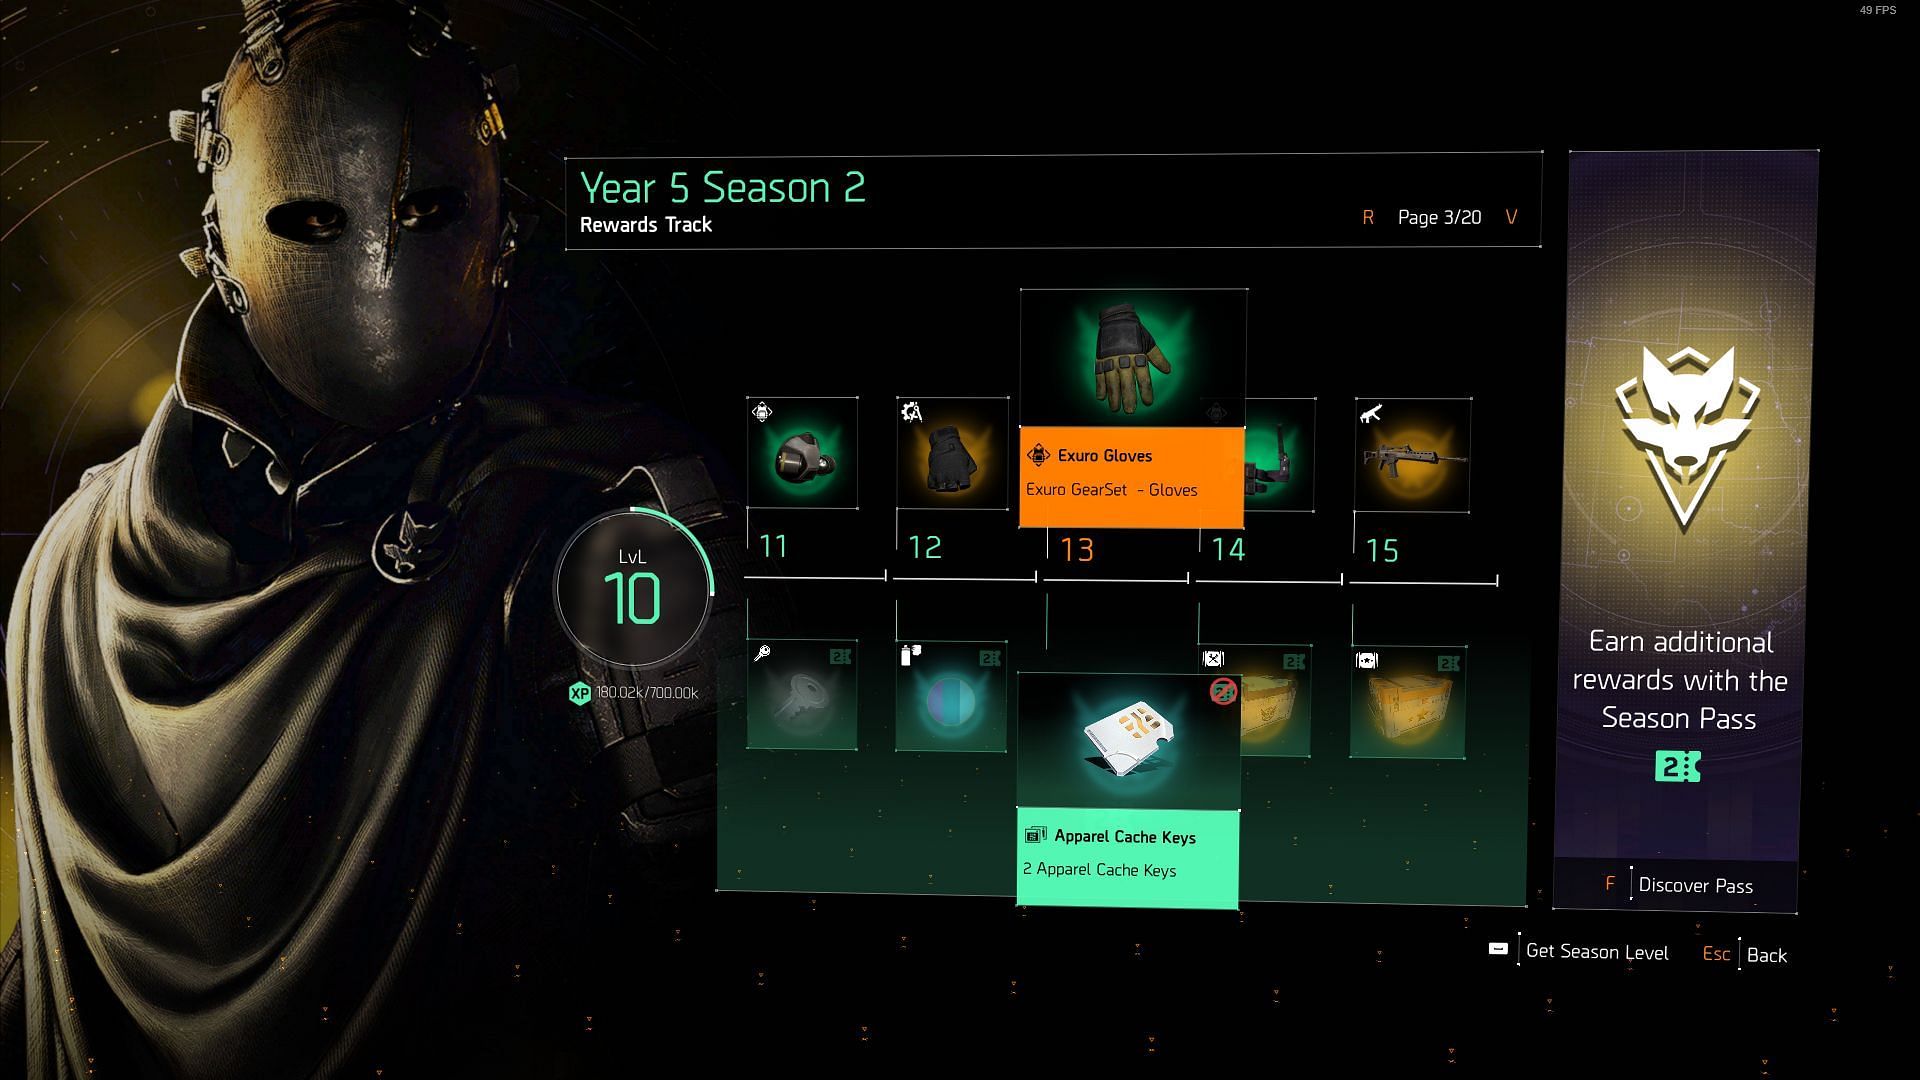 The Exuro Gear Set is located on the free track of the Puppeteers Season Pass (Image via Ubisoft)